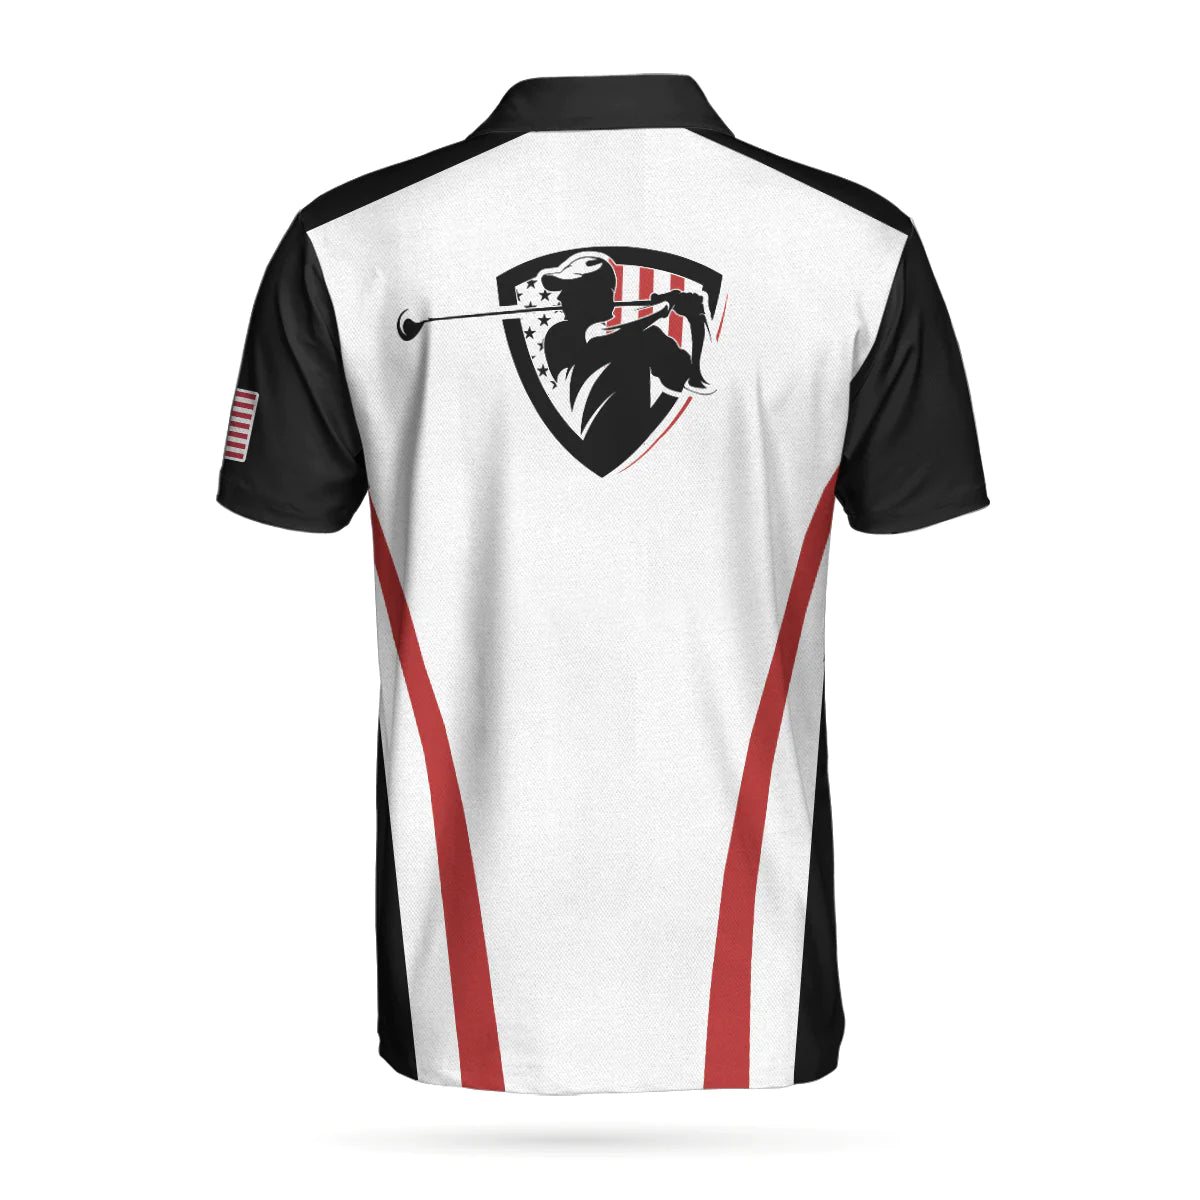 Customized Champion Golfer Polo Shirt with Red and White American Flag Design: The Ultimate Golf Shirt for Men – GP418